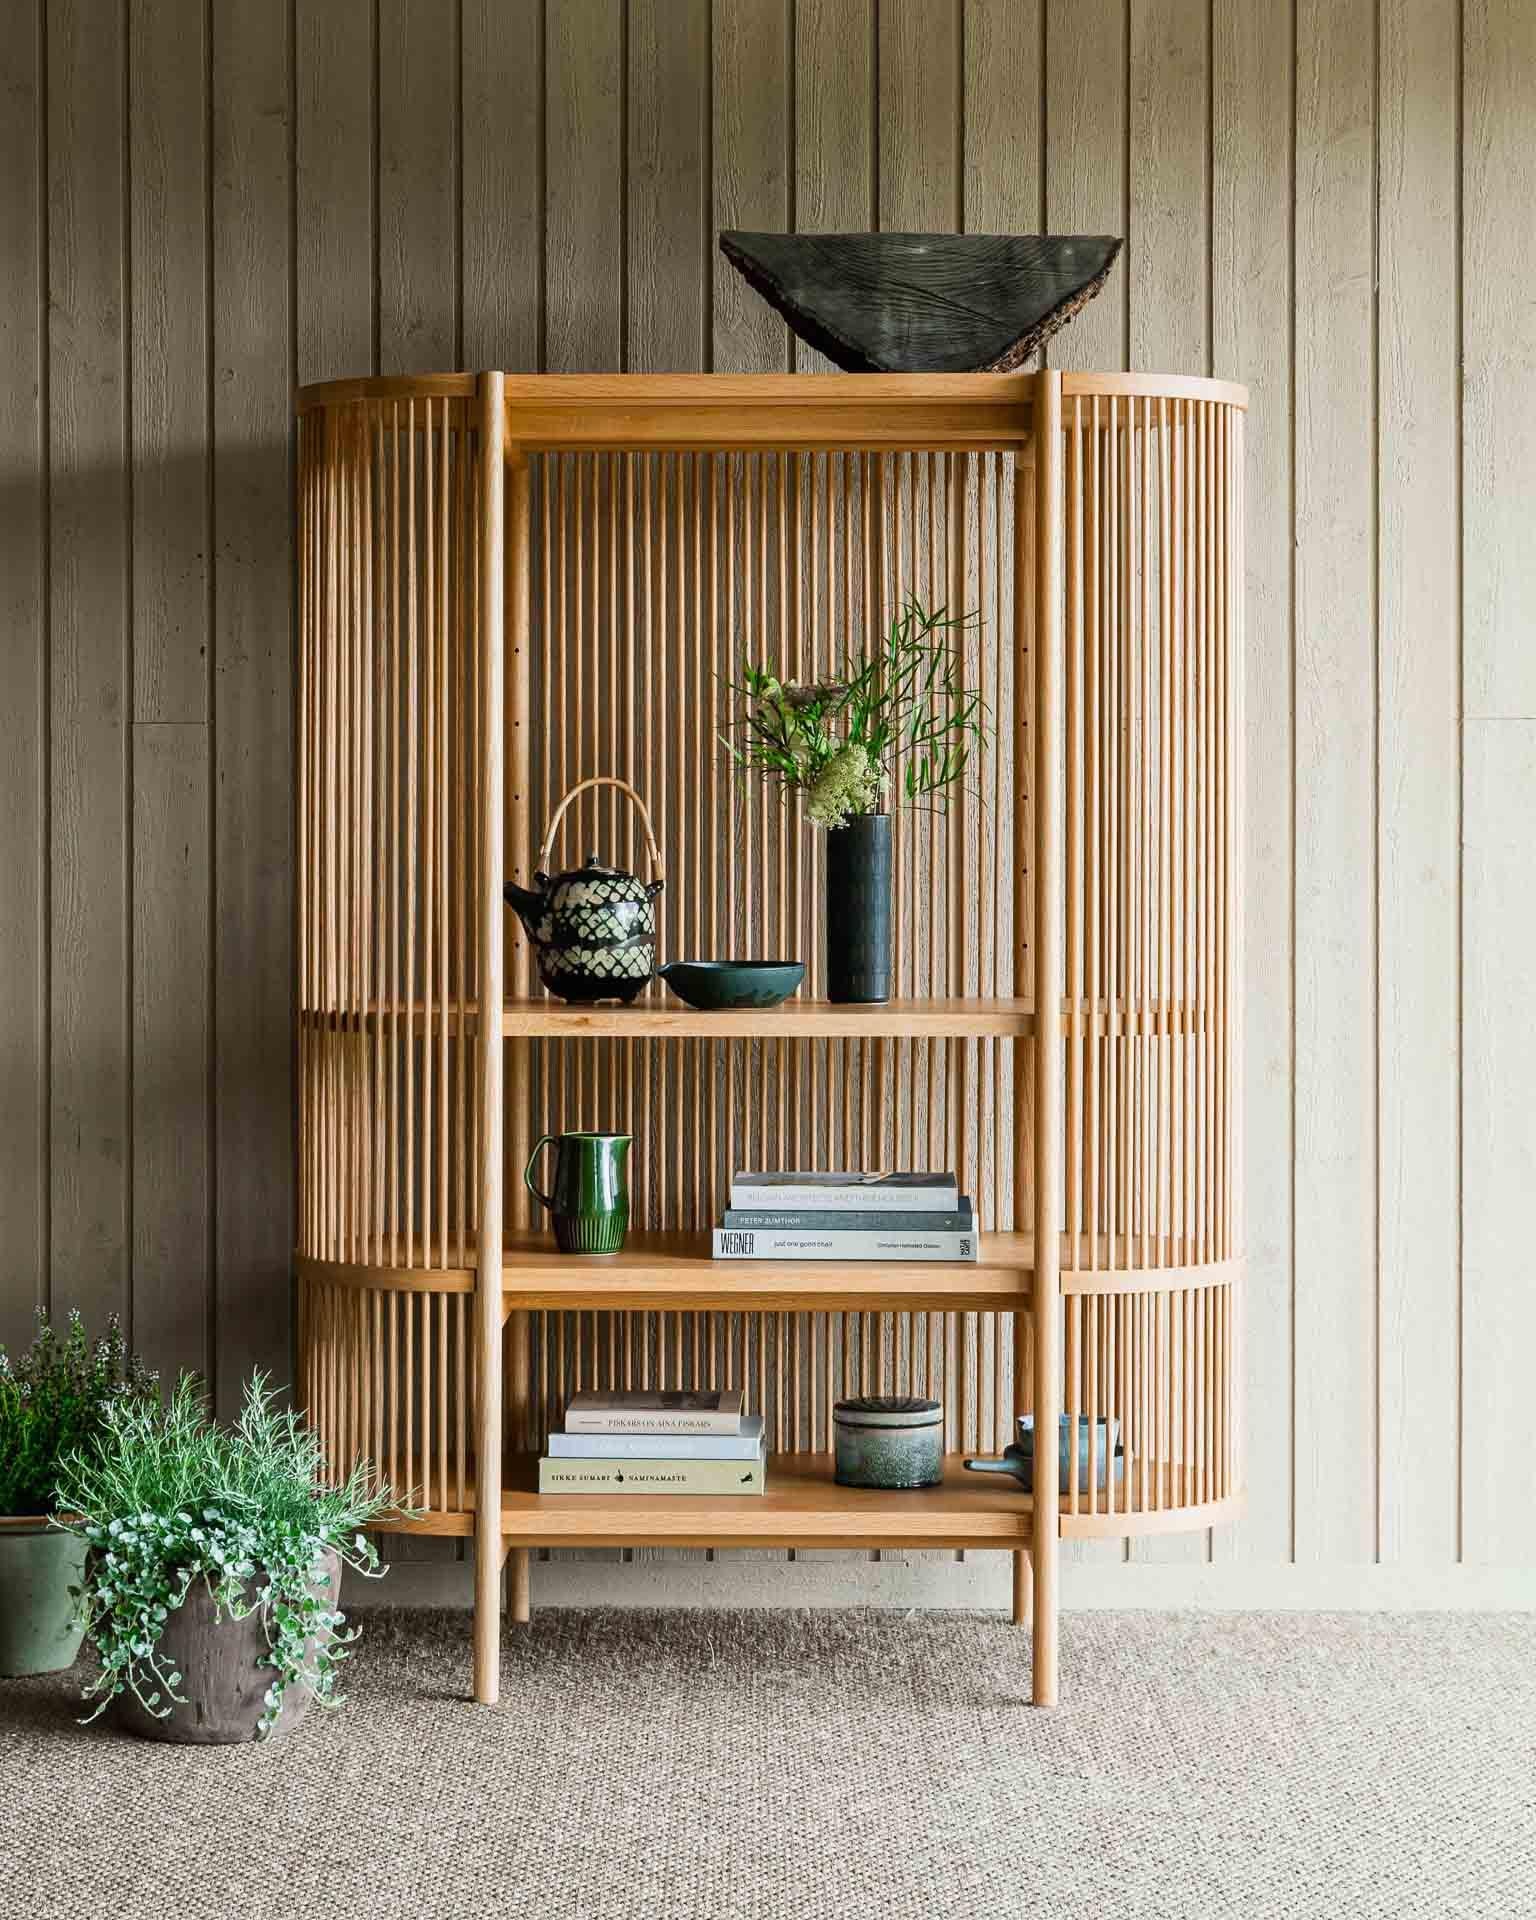 The Bastone case piece collection, which consists of a cabinet and a sideboard, is designed by the master cabinet maker and designer Antrei Hartikainen for Poiat Furniture. Somewhere on the boundary of art and design, the collection showcases the